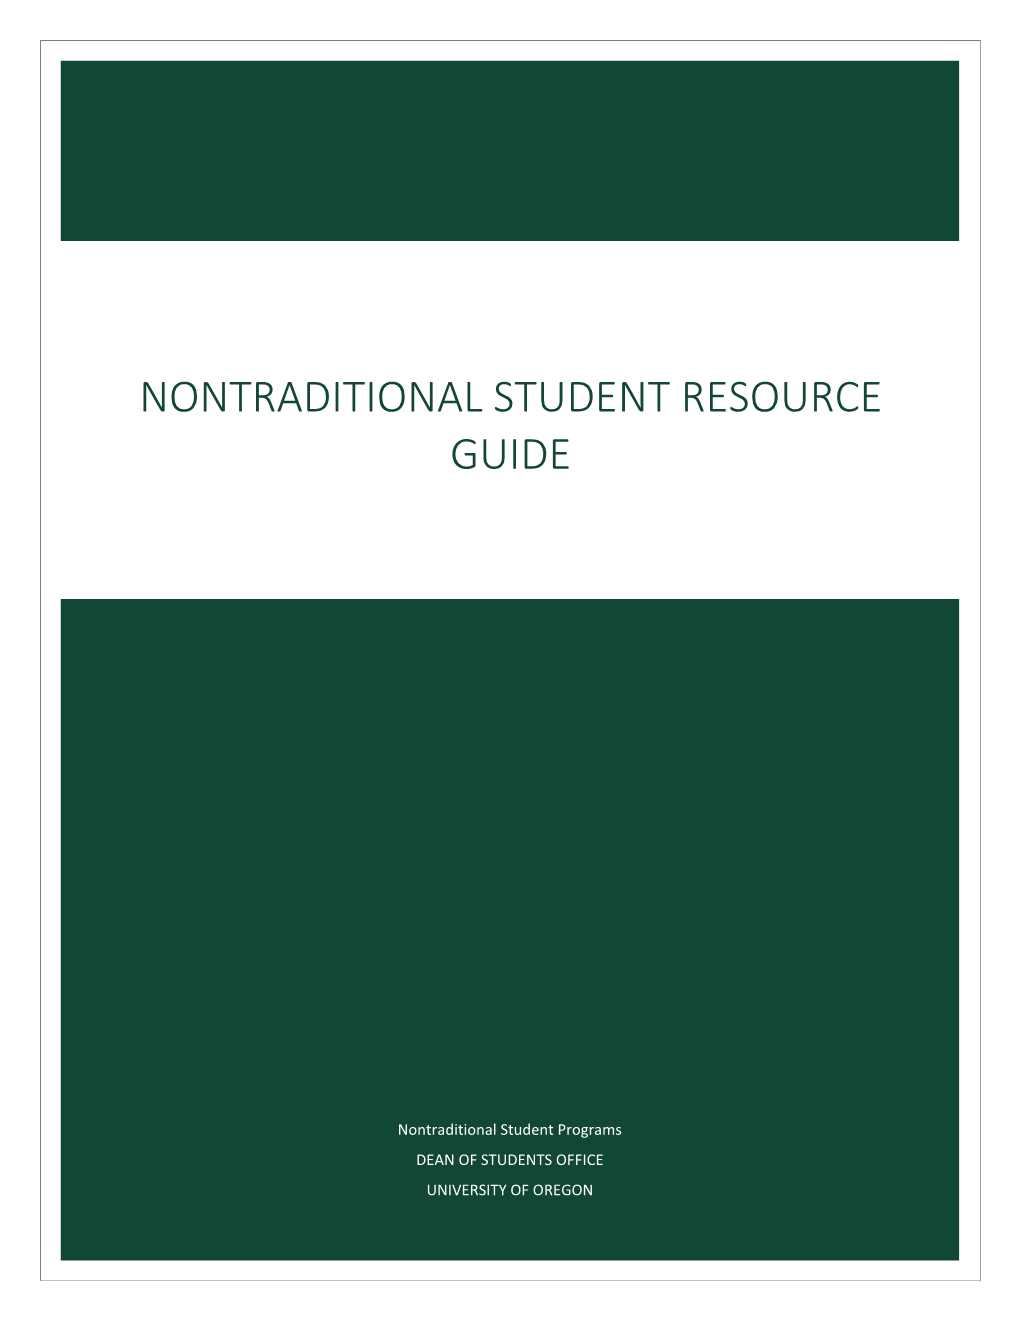 Nontraditional Student Resource Guide